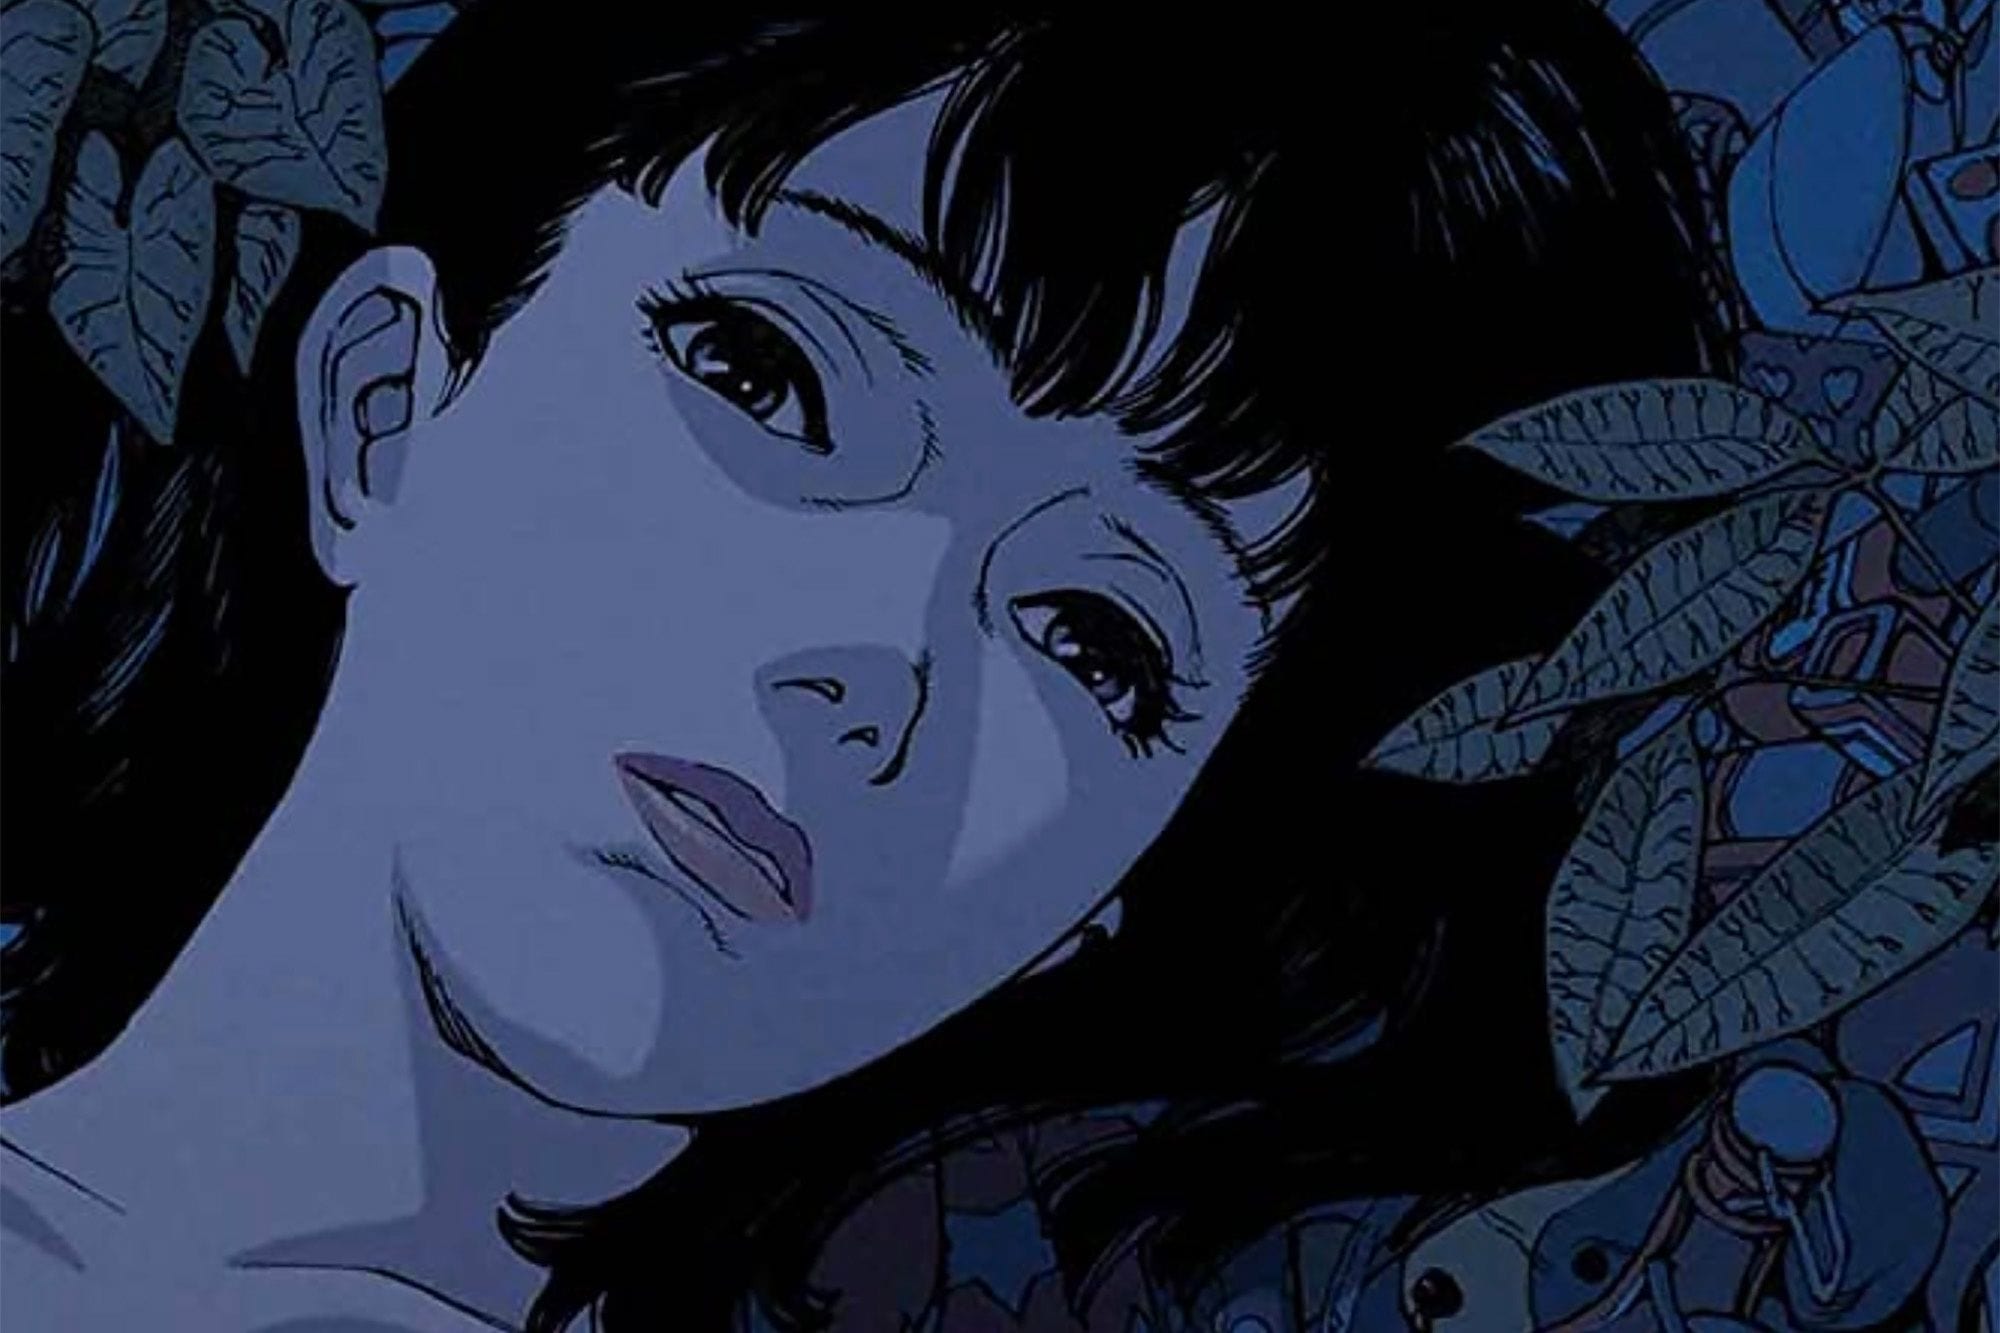 The “Luxurious Loneliness” of Anime Film ‘Perfect Blue’